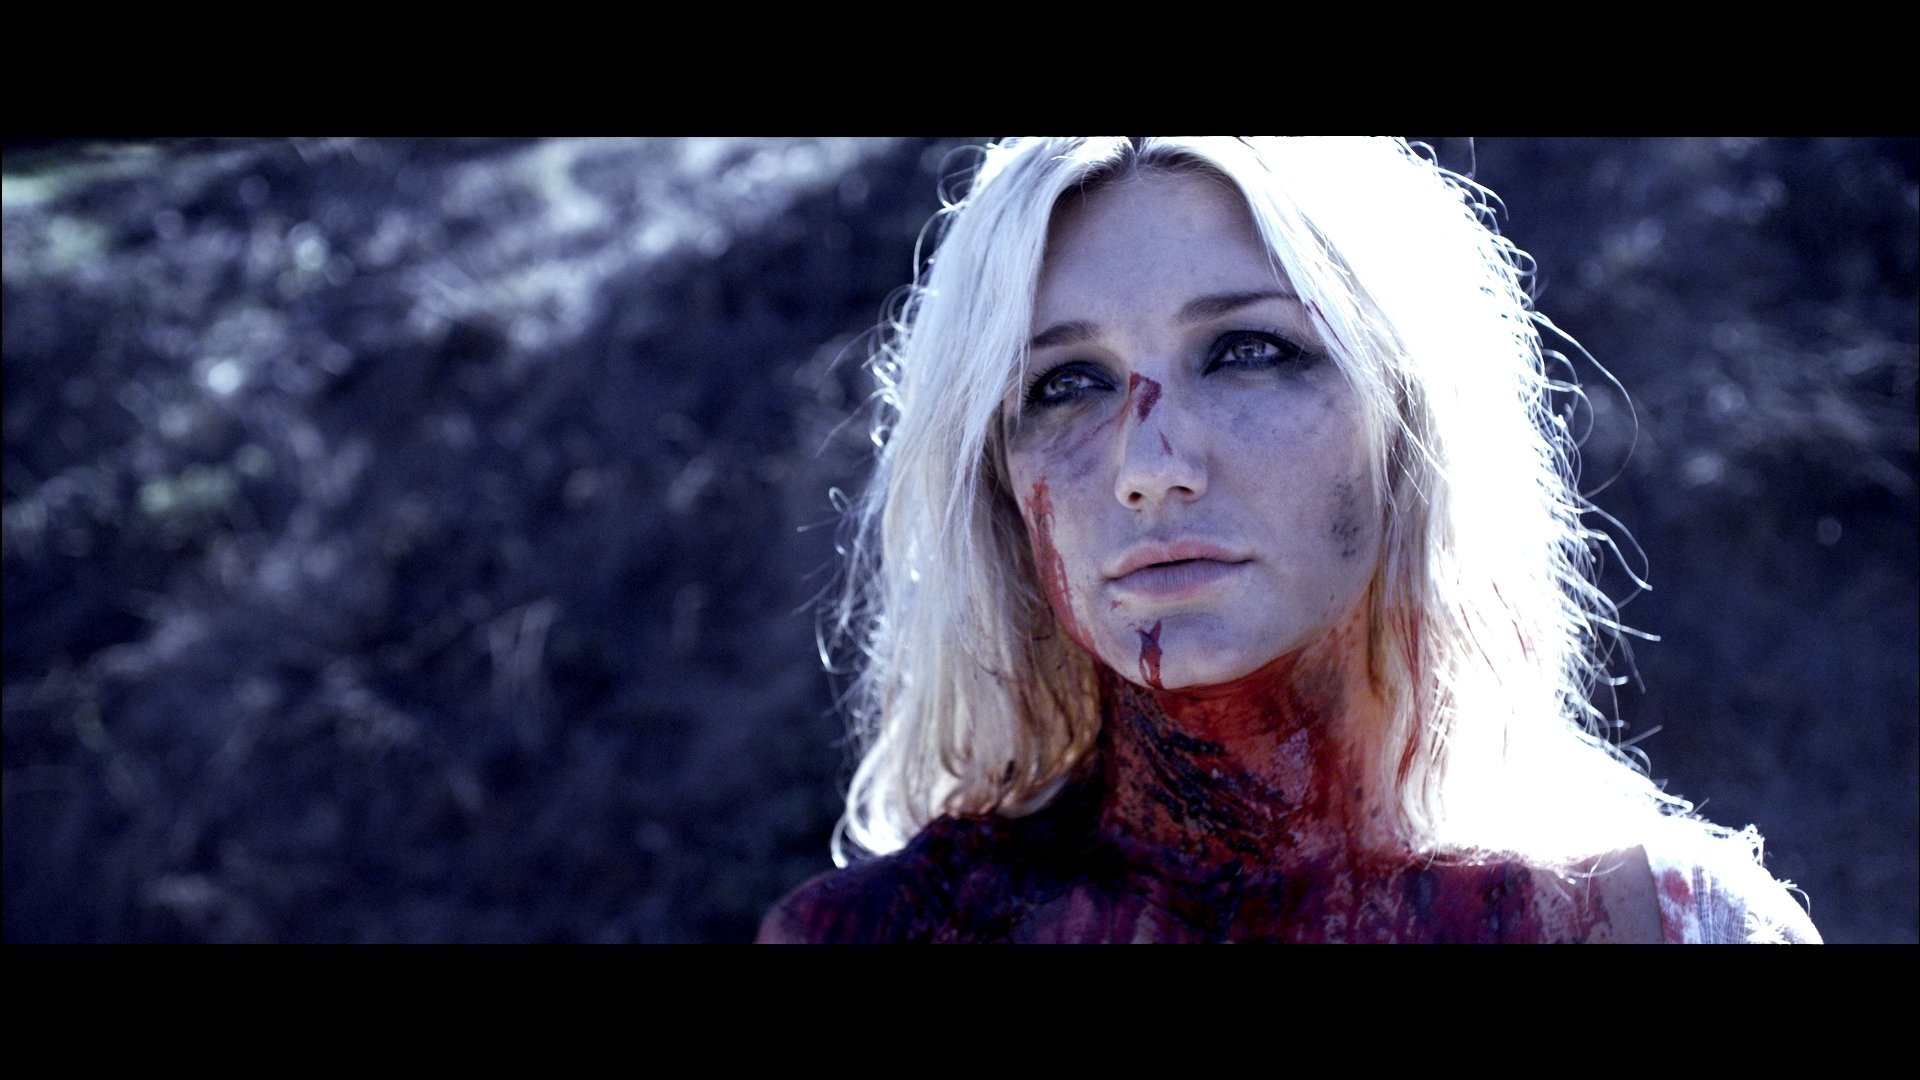 Brooke Hogan as The Reality Star in L.A. Slasher.